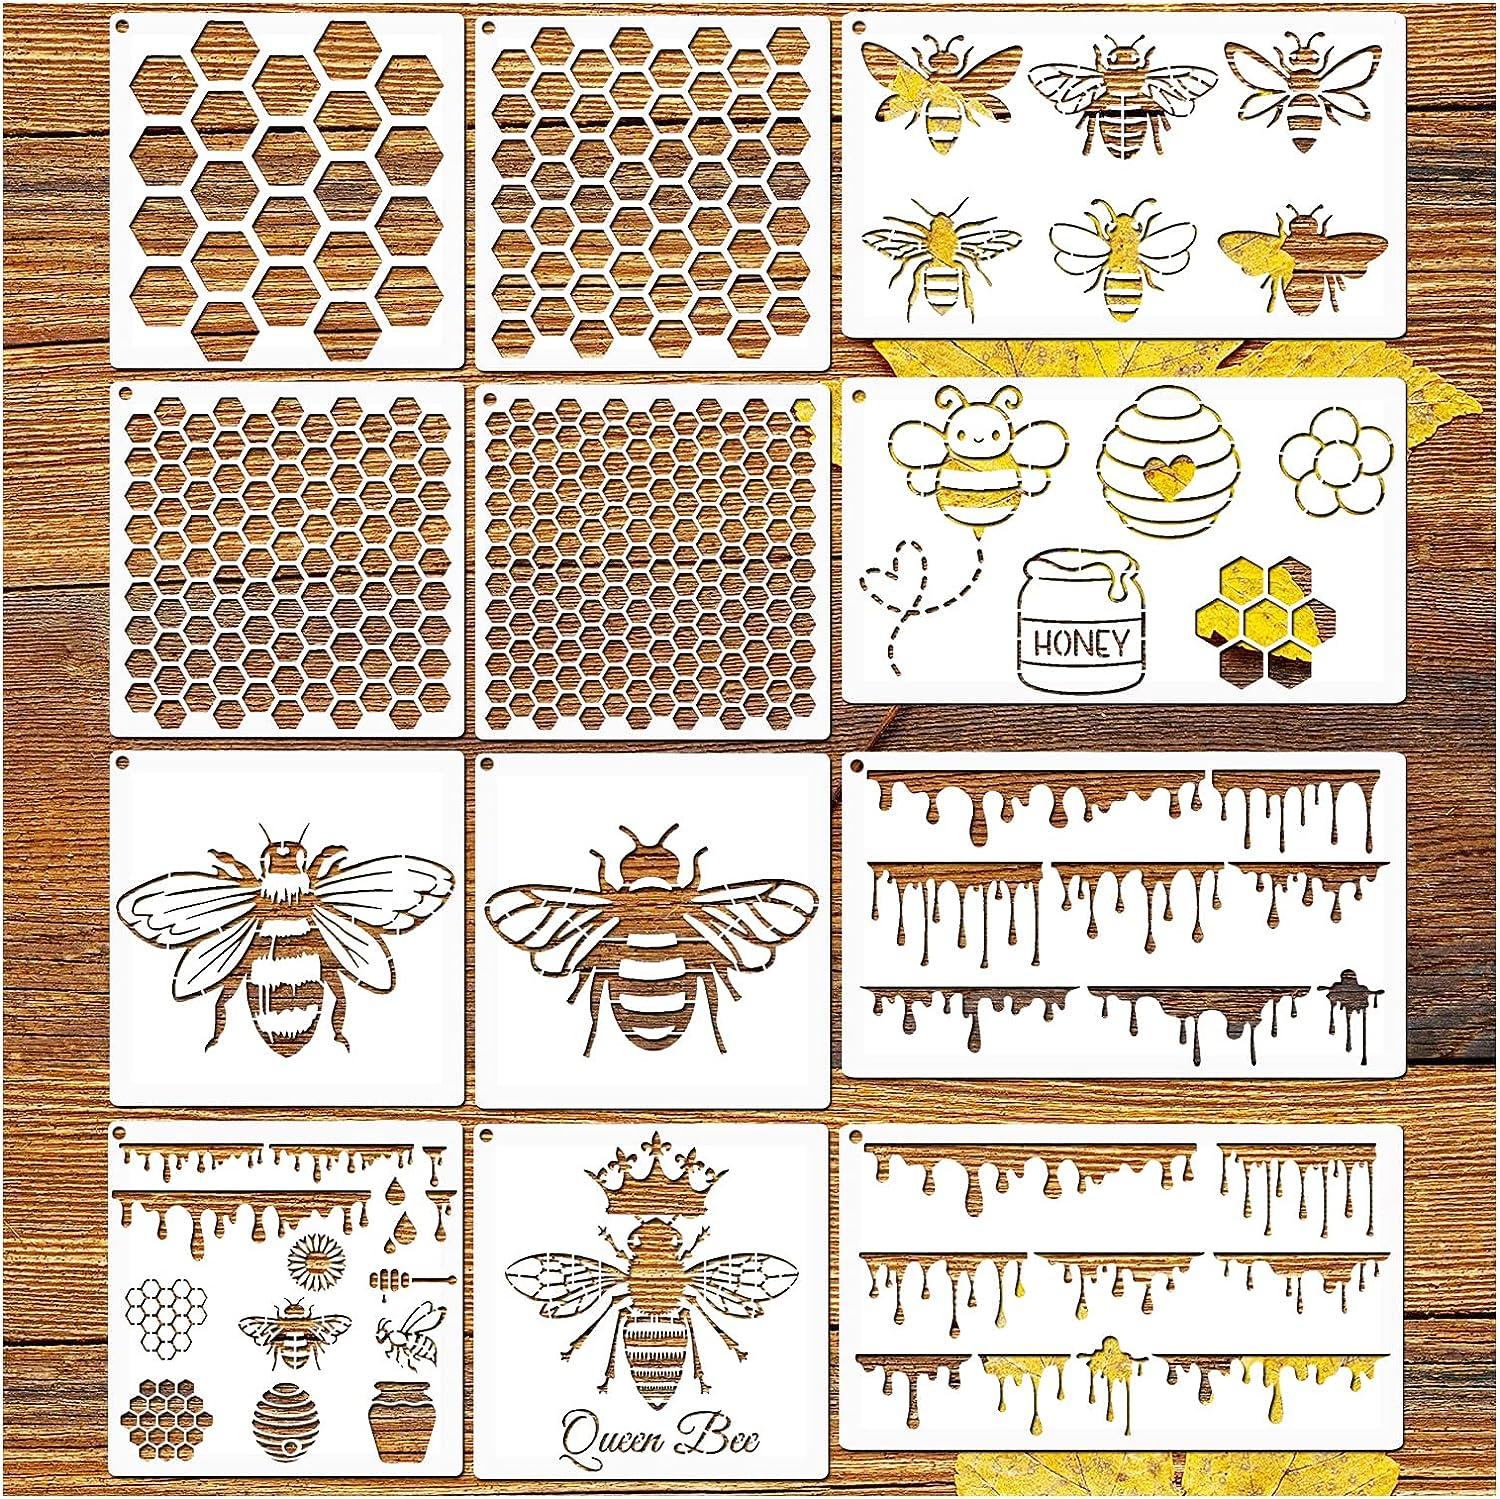 Plastic Custom Stencils for Wood Signs, Cakes, DIY Craft, Reusable